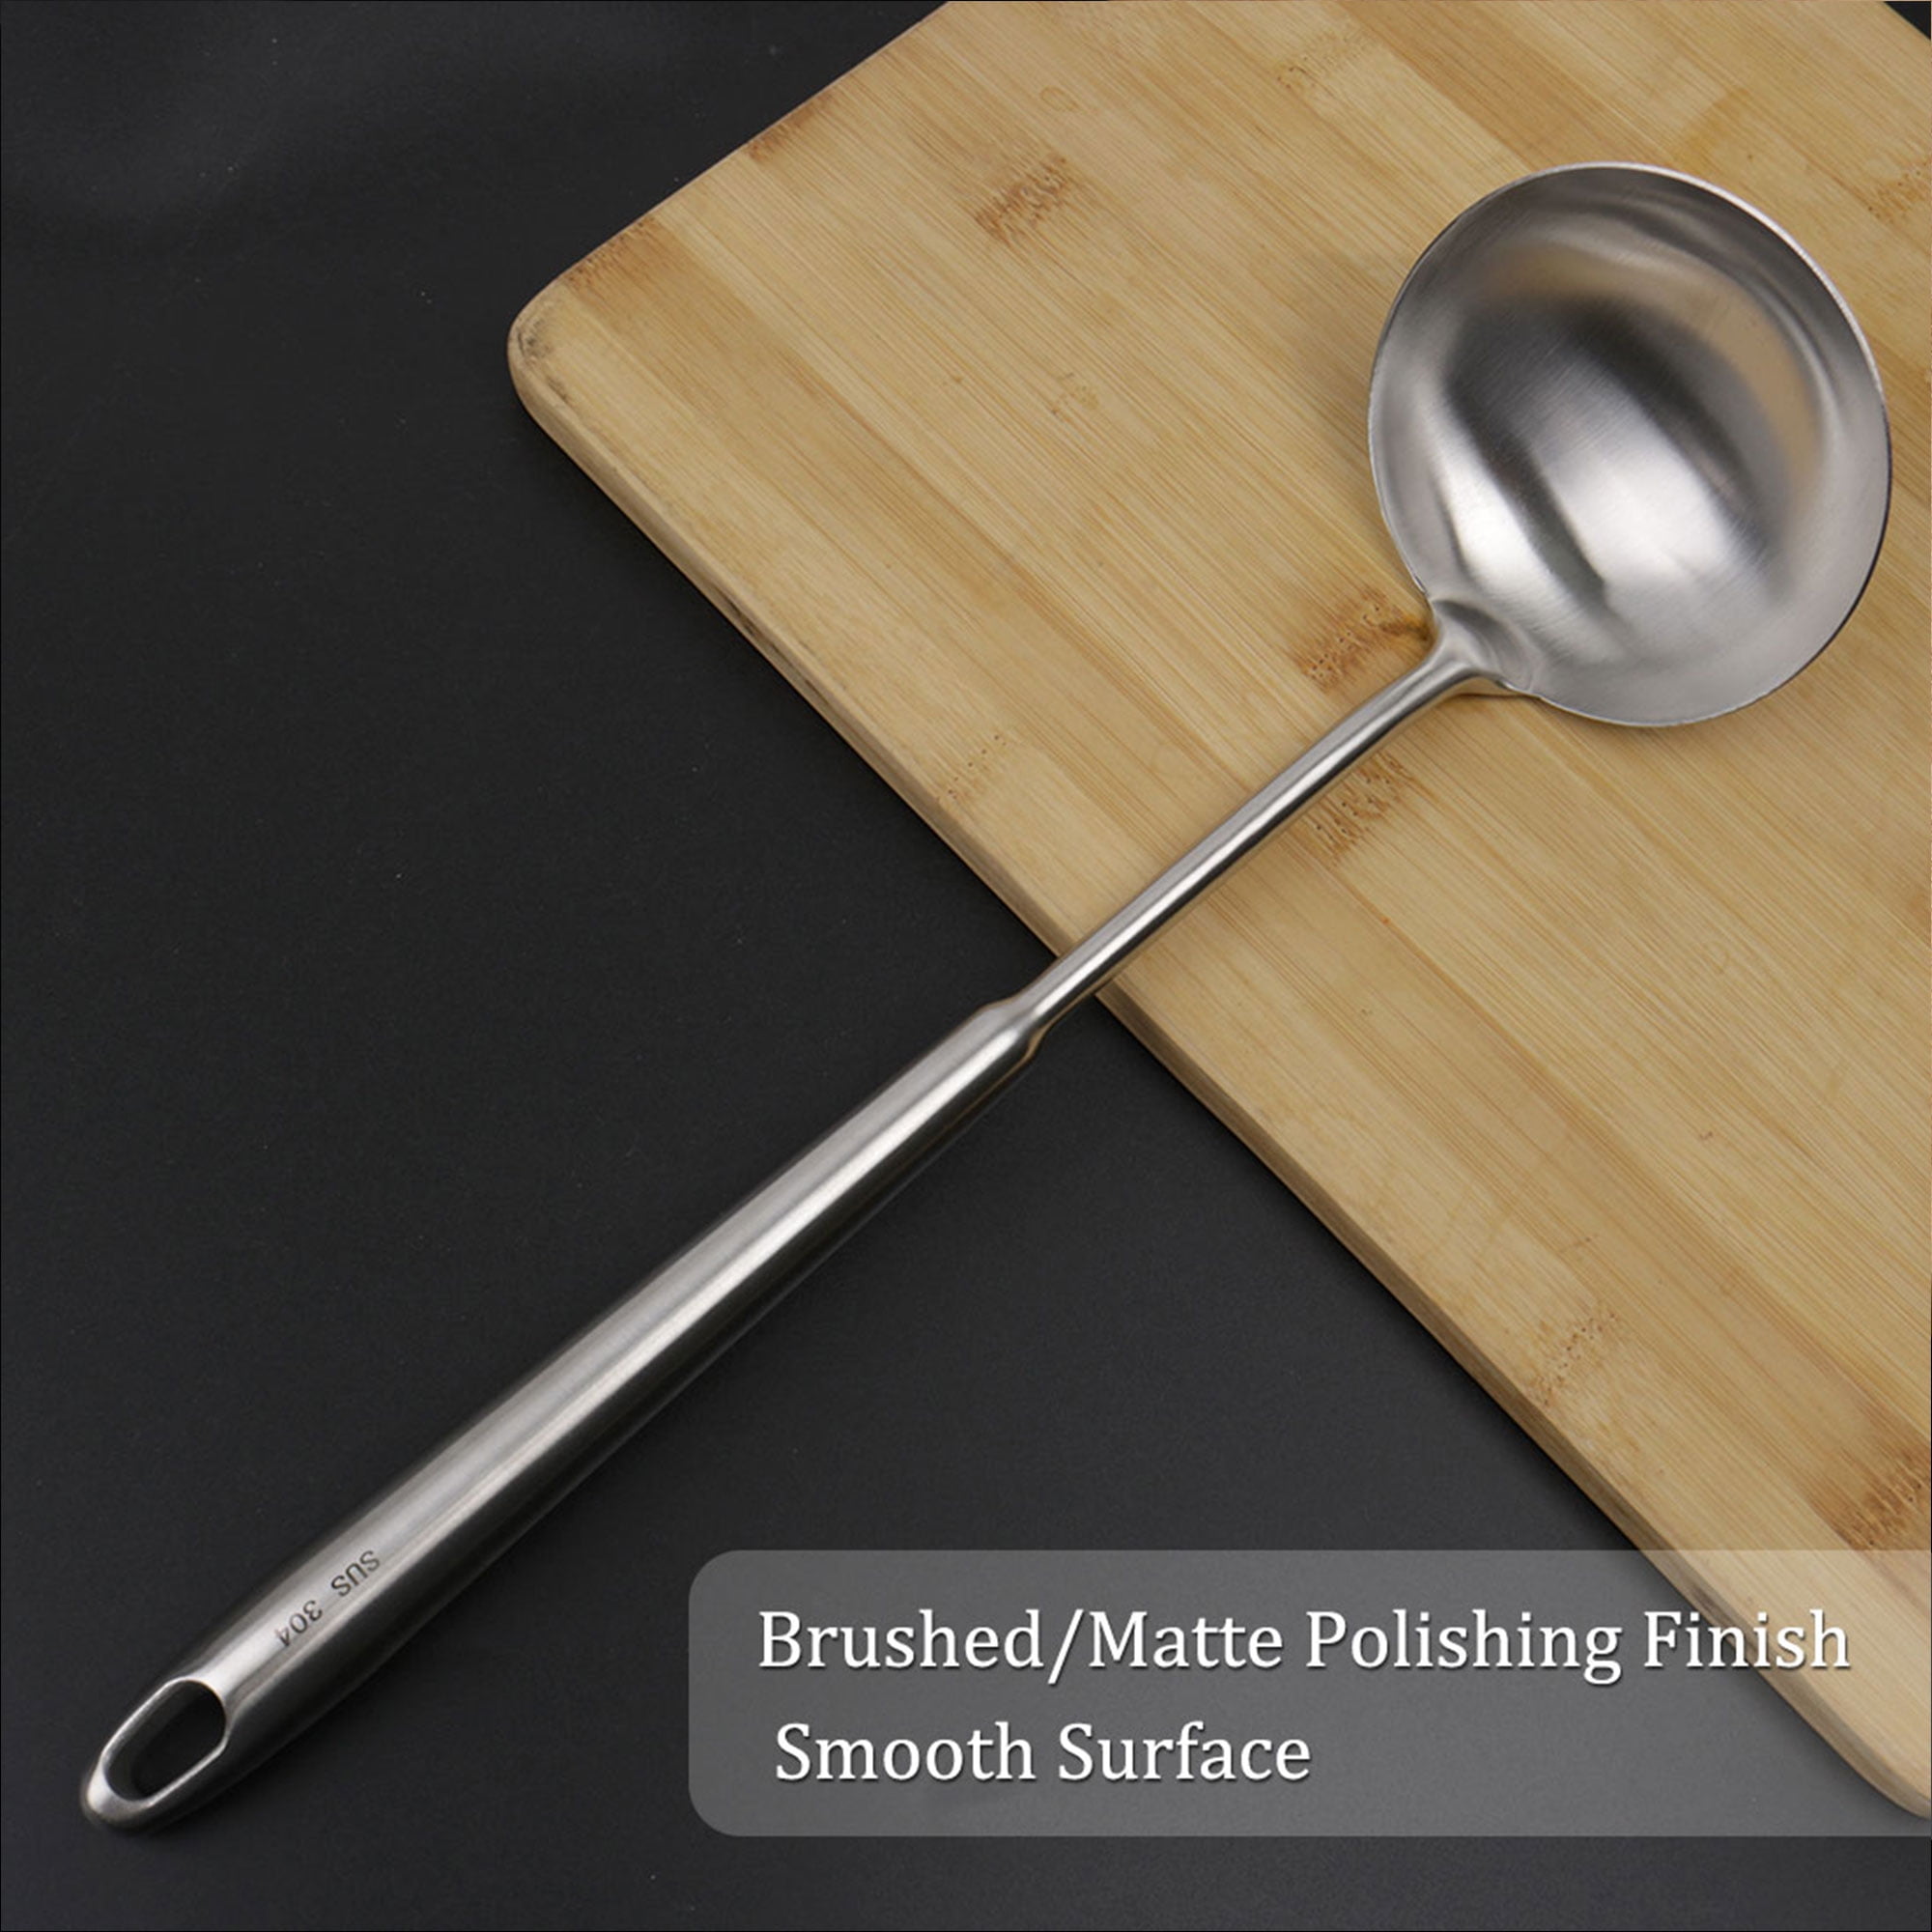 Stainless Steel Ladle 11.5 Inch Large Kitchen Utensil Spoon Soup Serving Ladle 